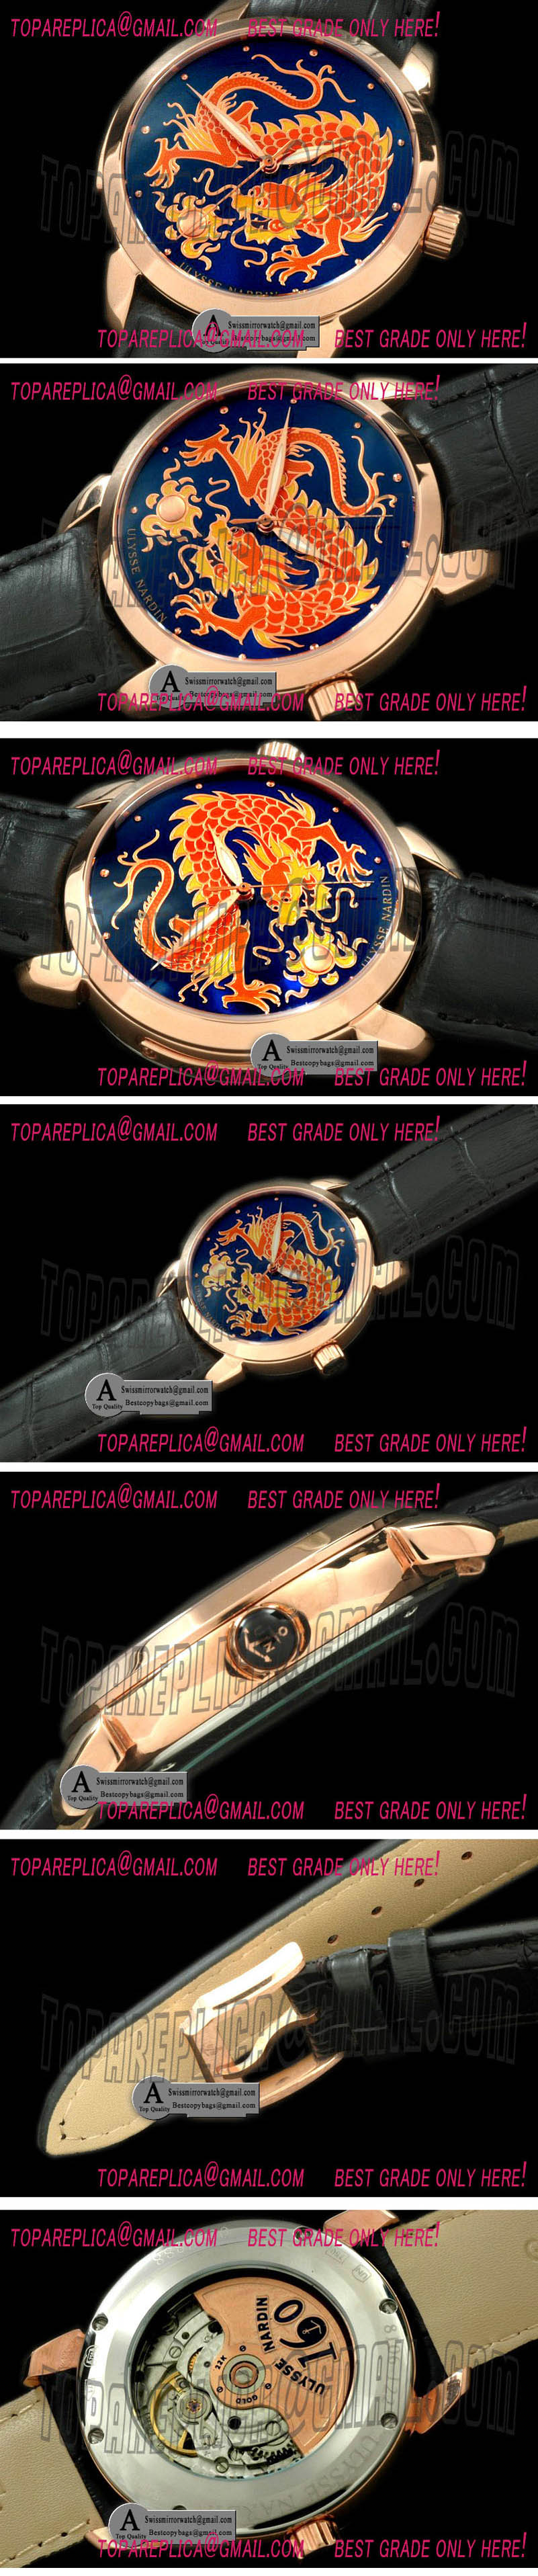 Ulysse Nardin Classico Enamel Champleve Dragin Rose Gold Leather Blue A 2836 Replica Watches